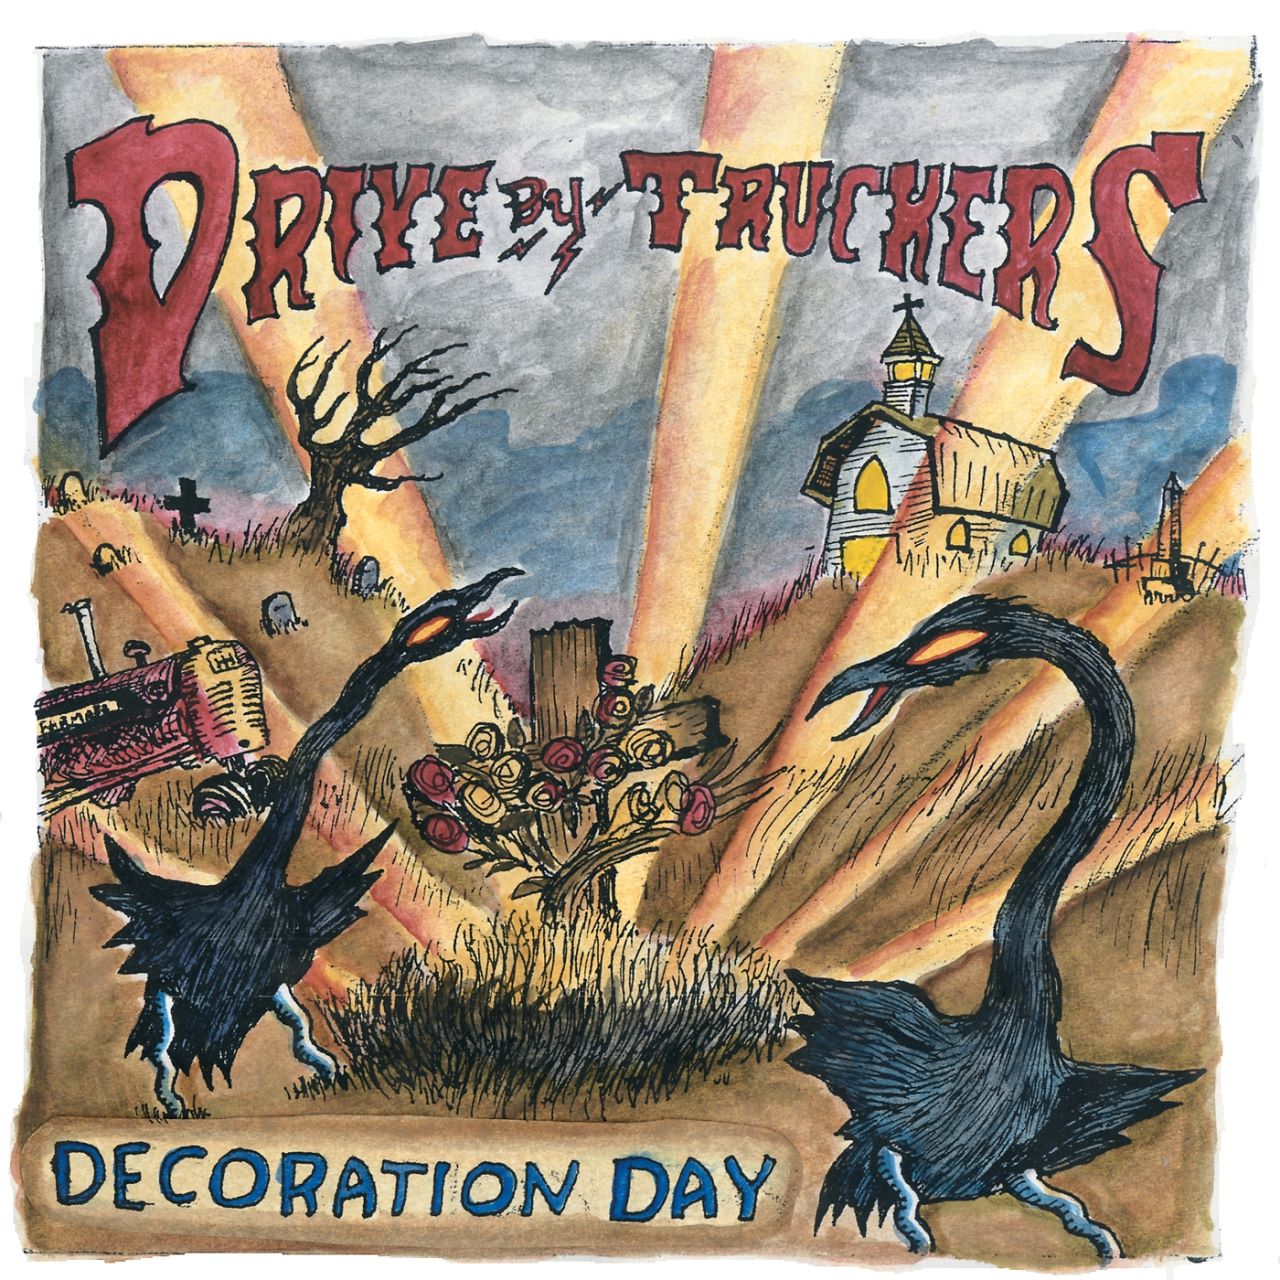 Drive-By Truckers - Decoration Day cover album